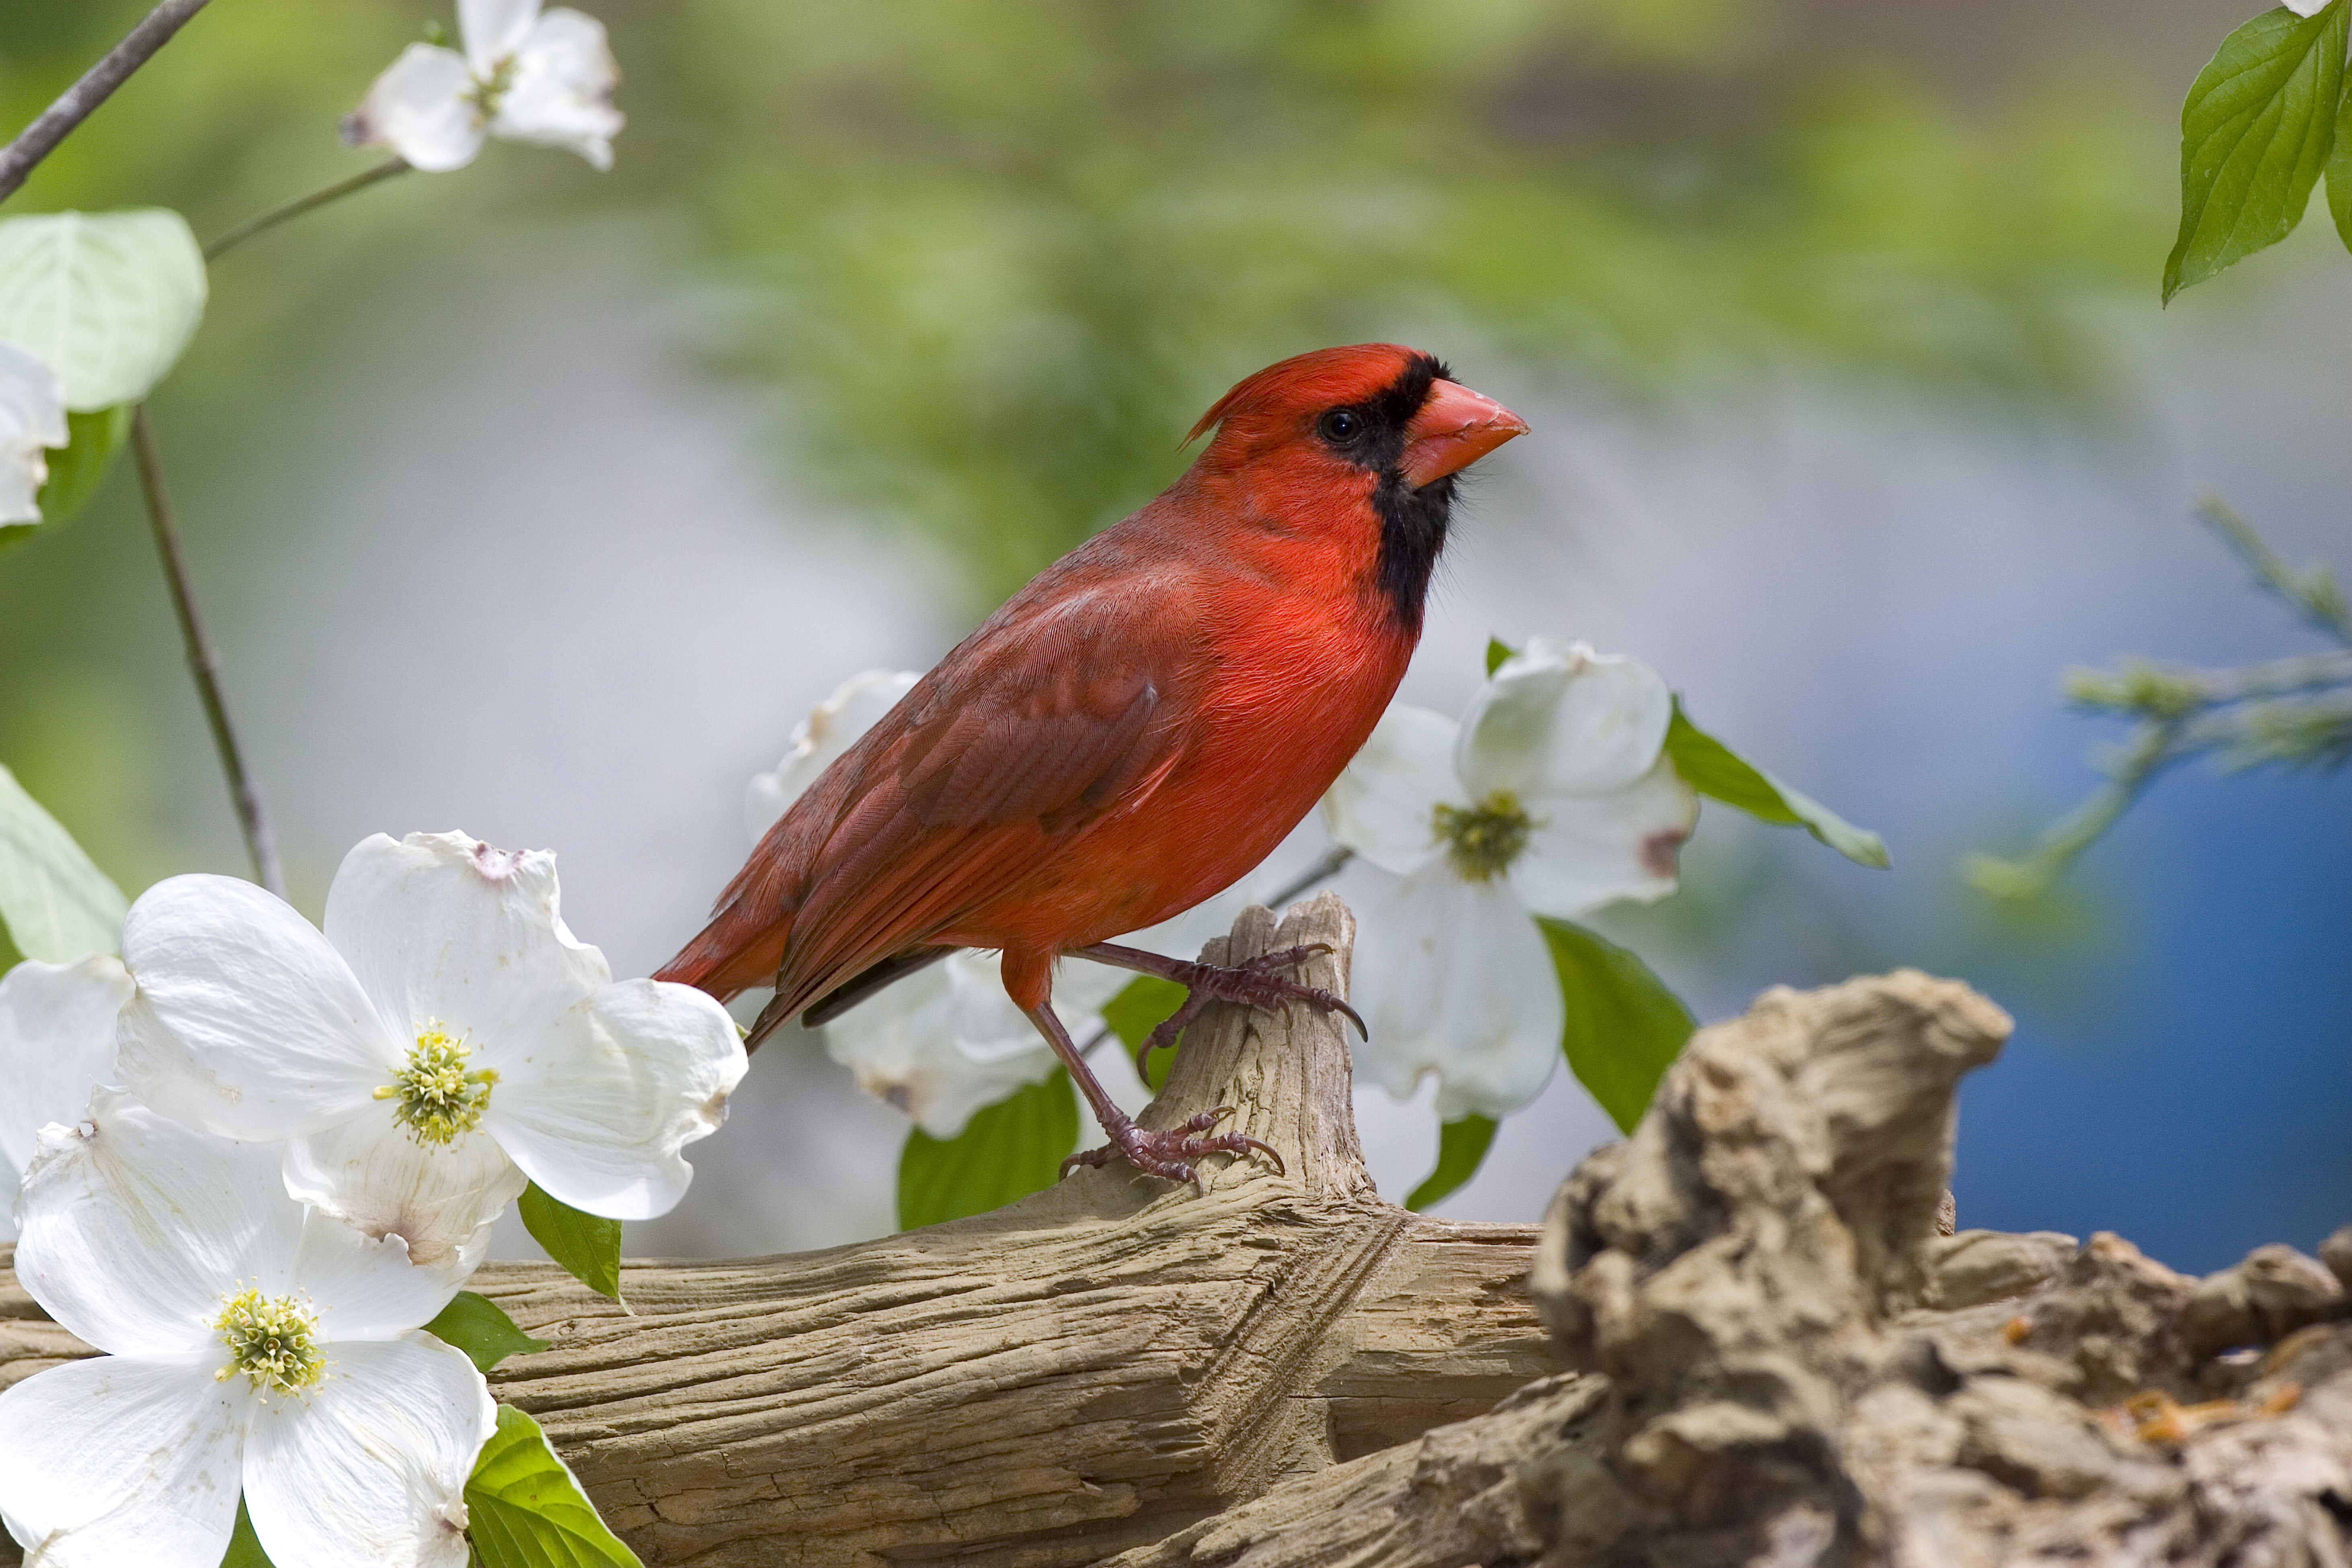 close-up-of-cardinal-in-blooming-tree - Ohio Pictures - Ohio ...